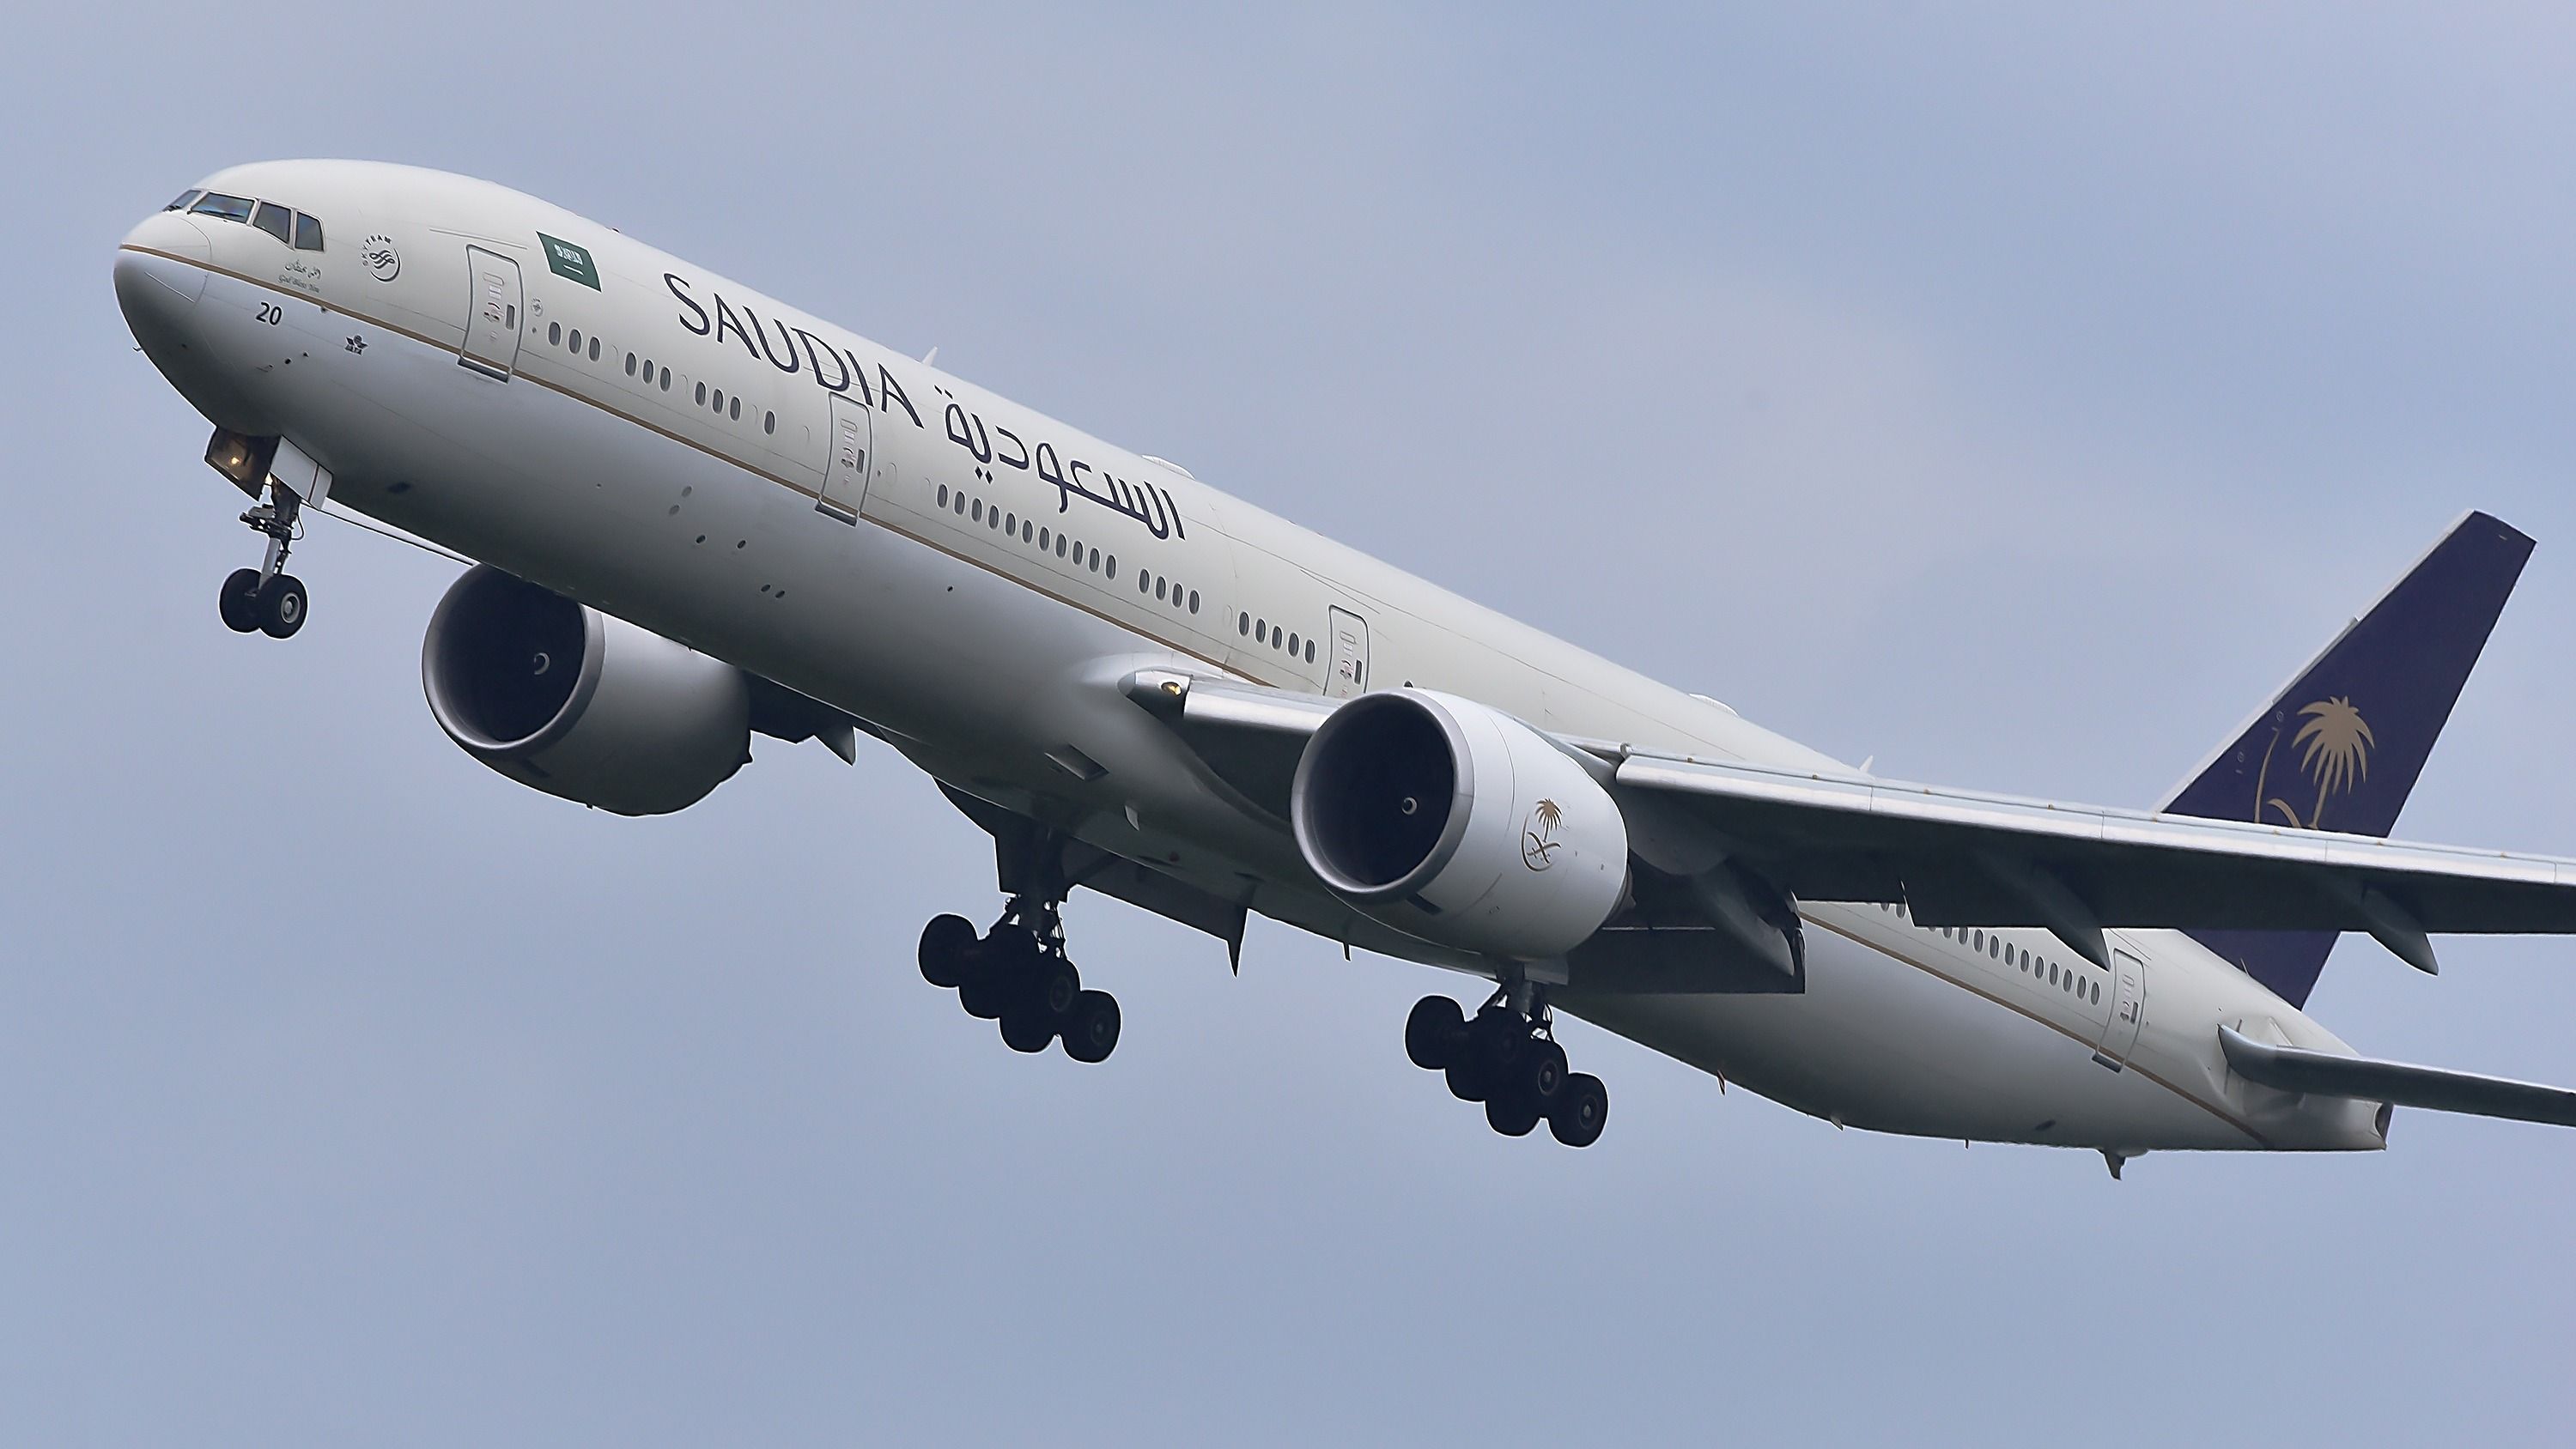 Saudia Boeing 777 over the airport.